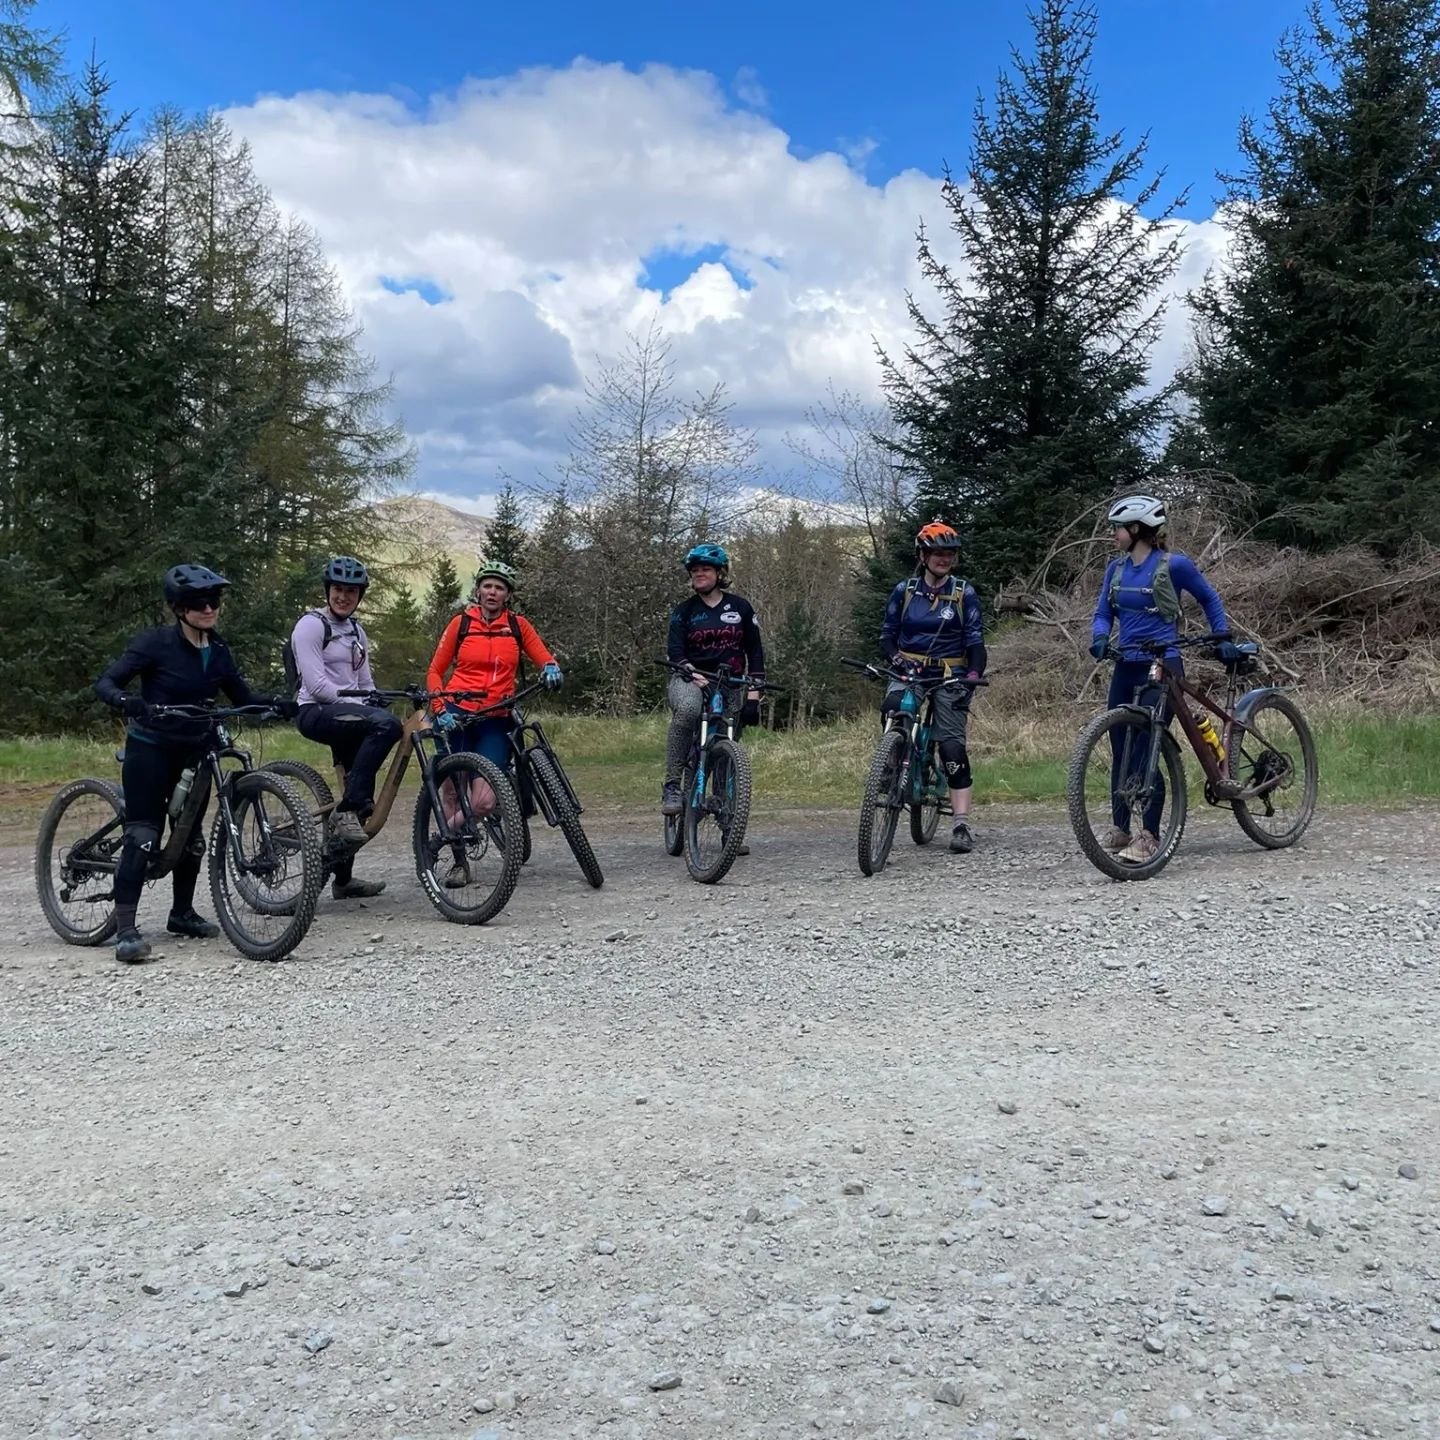 &quot;Matador's had loads of work done to it, it's really easy now!&quot;
Aye, right Sandy! We don't believe you!

Fun day in the sun riding some old favourites and a bit of adventure checking out some new (to us) trails at Innerleithen.

Thanks for 